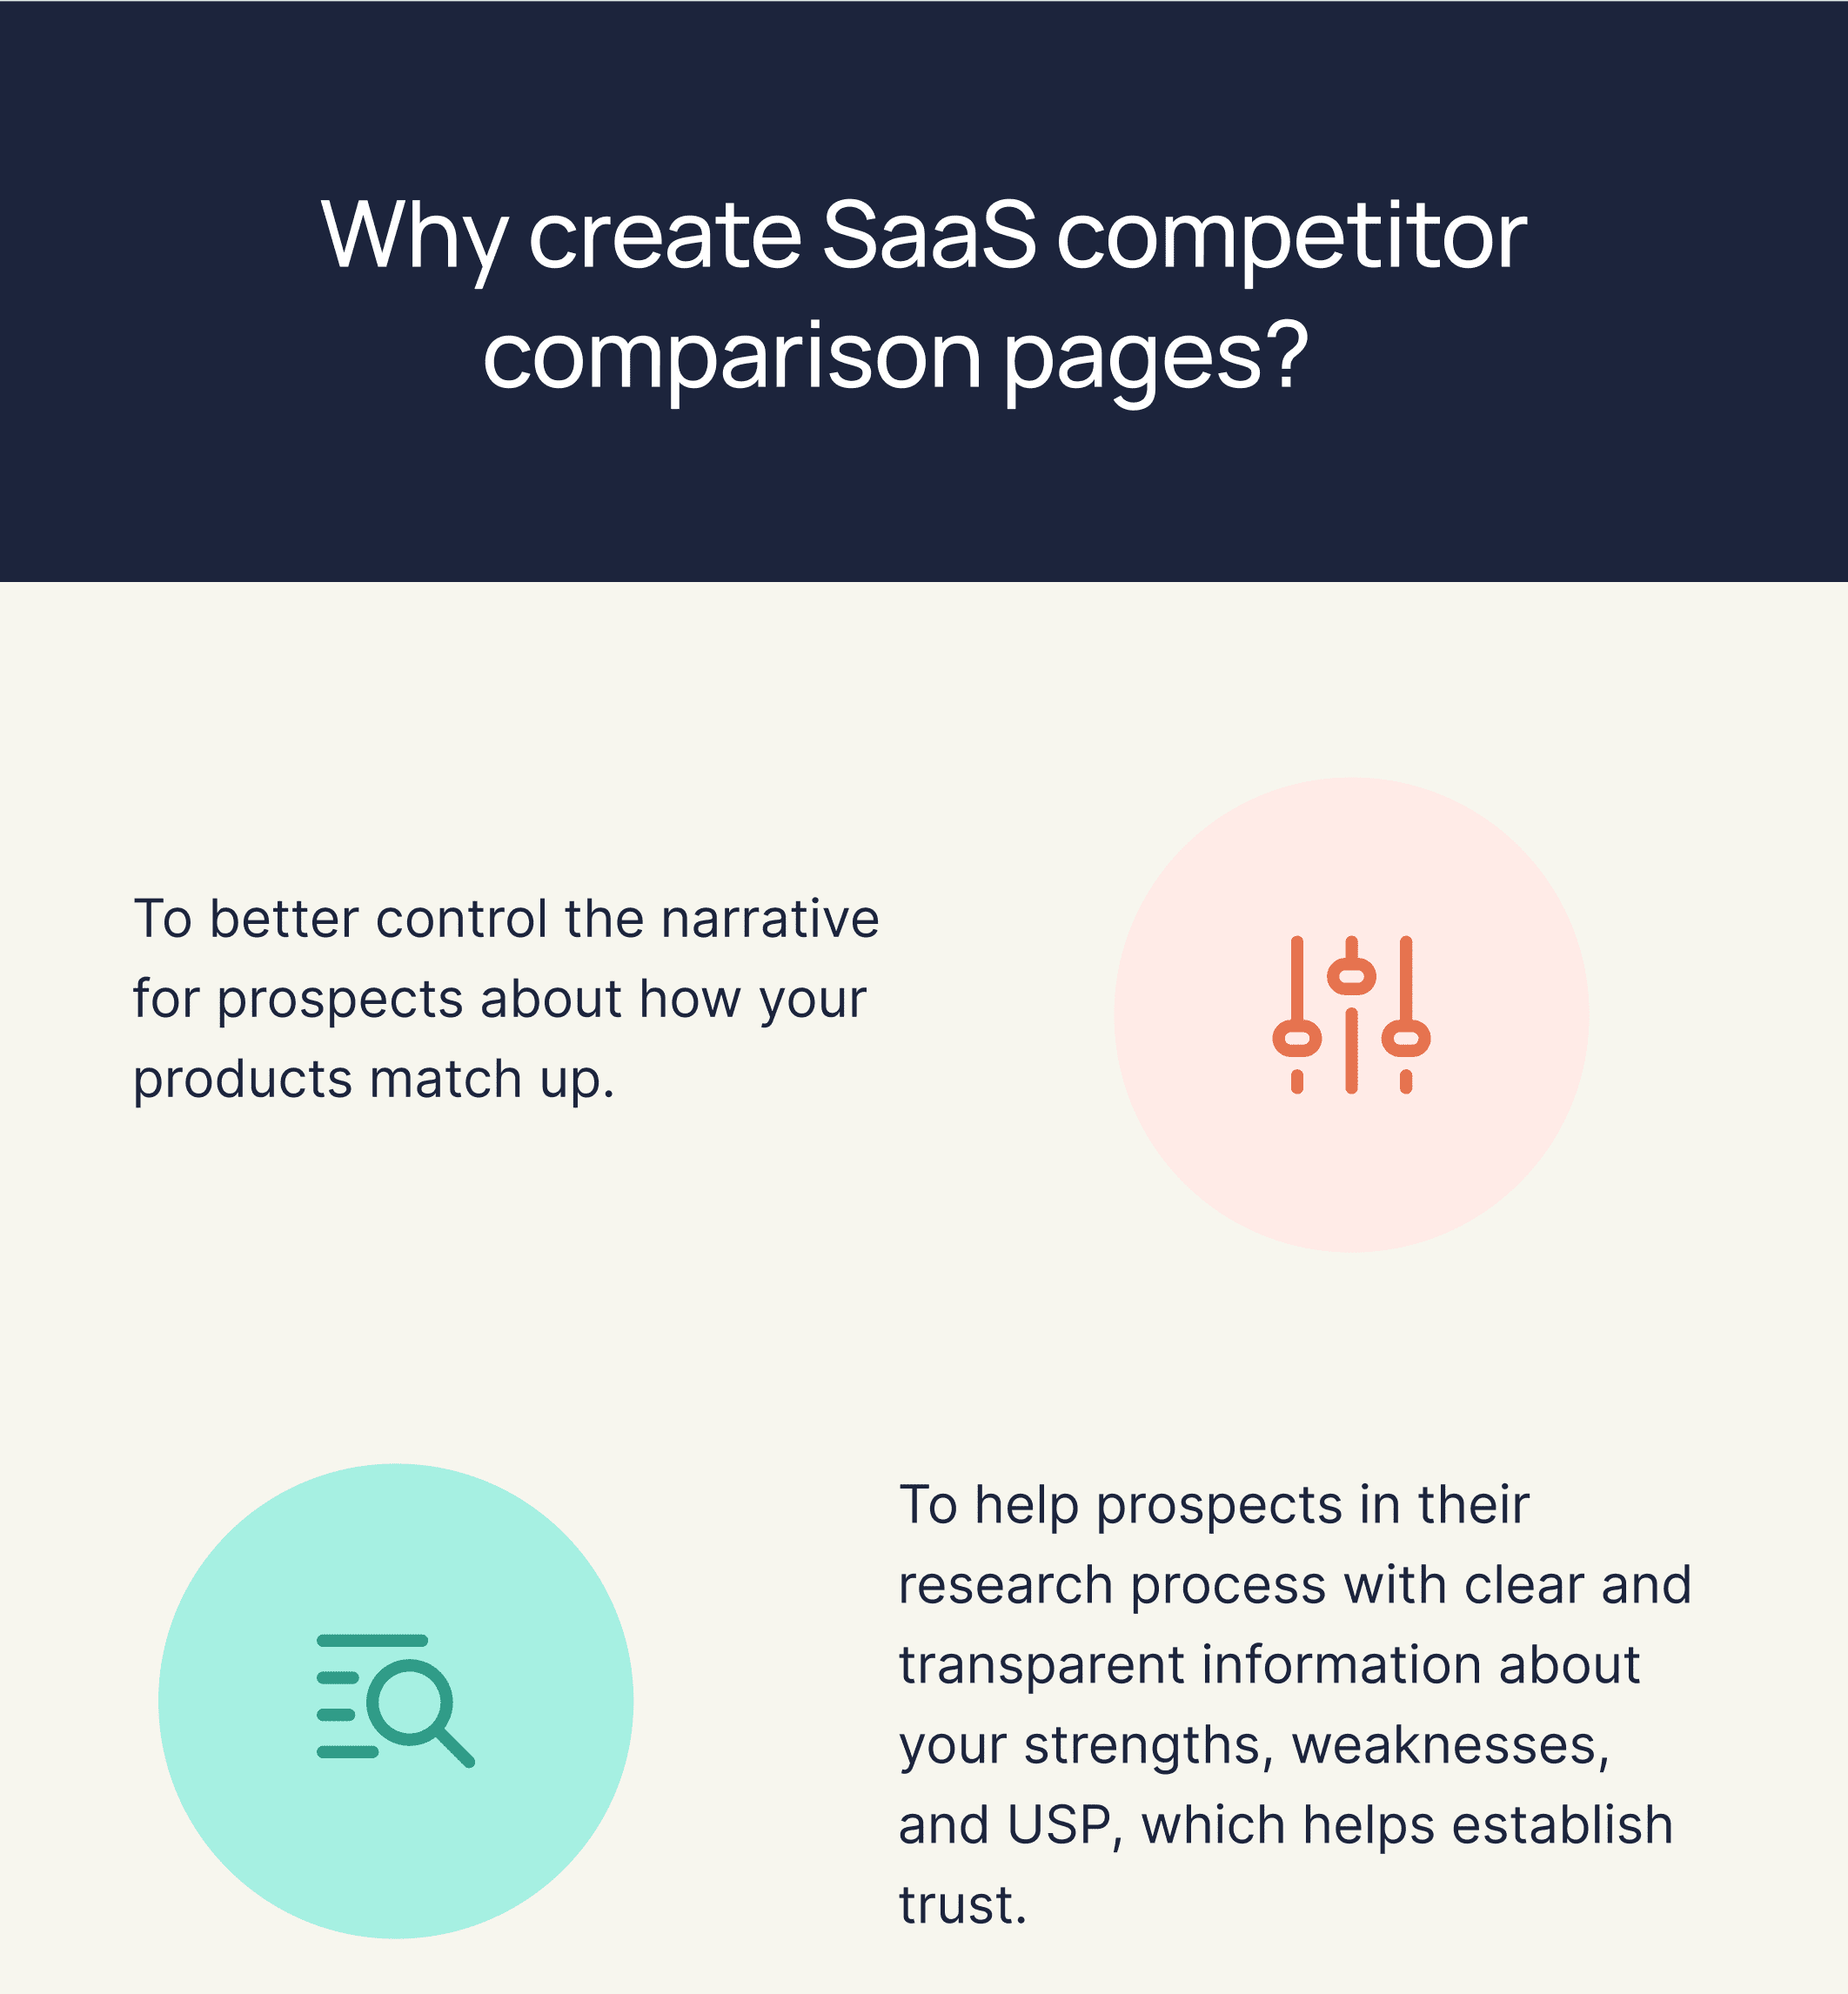 grofusely_saas_compettitor